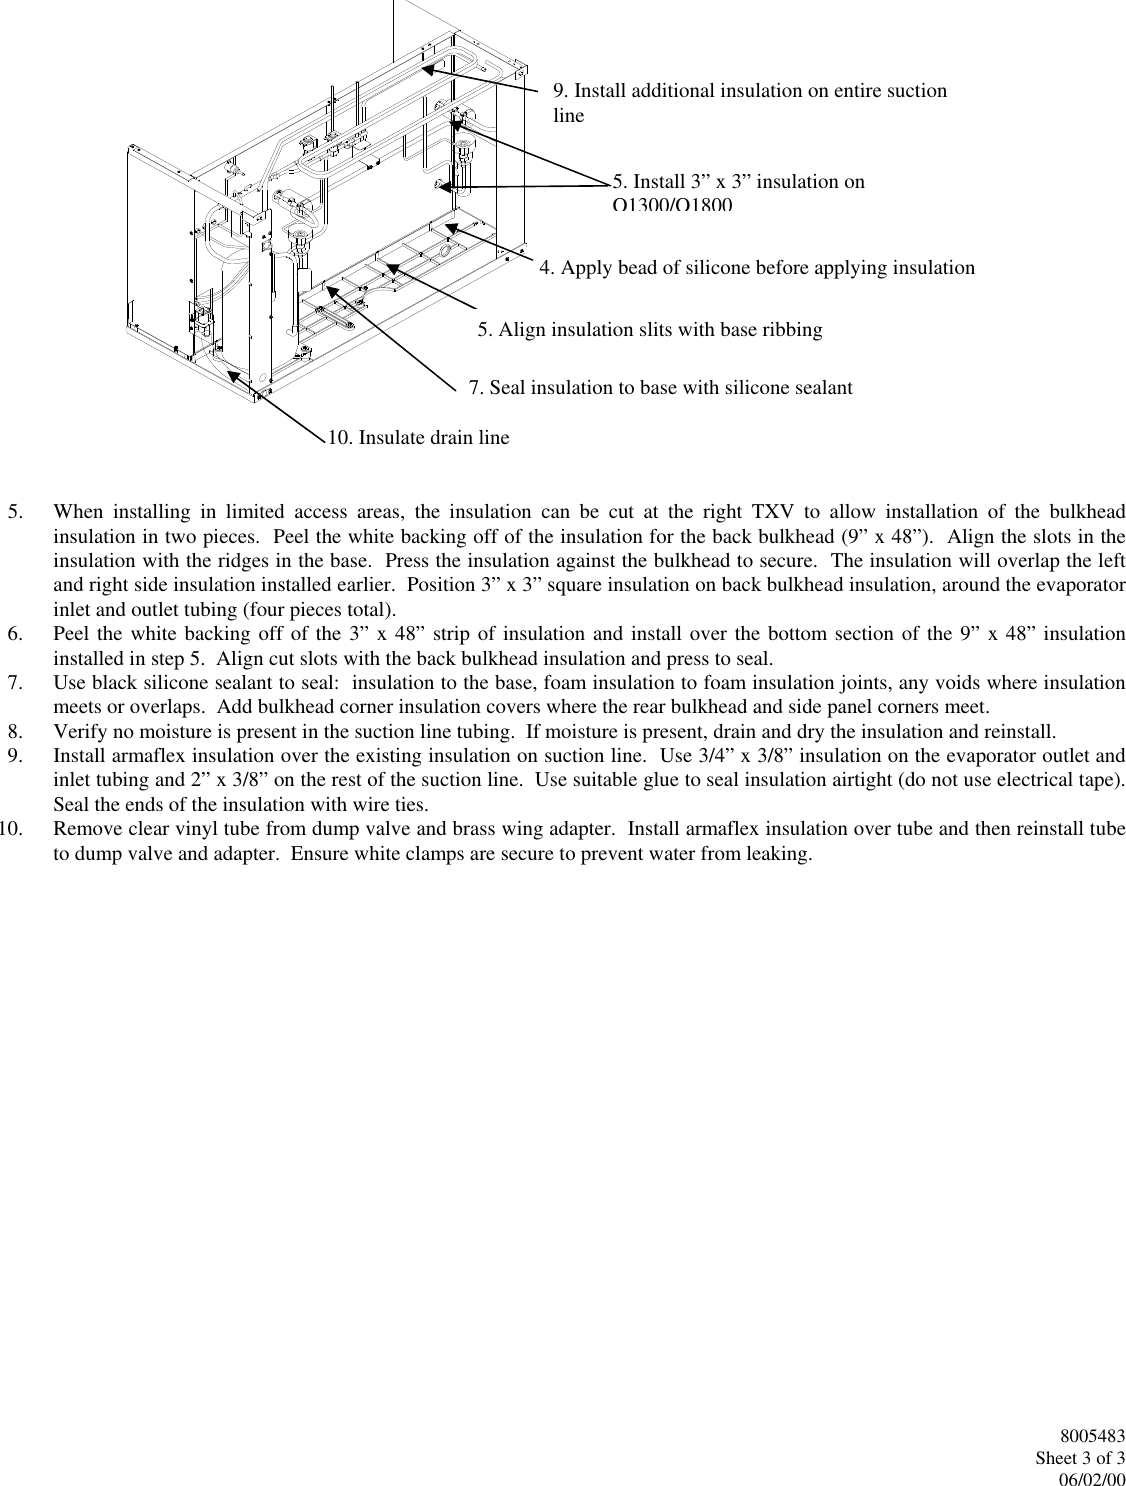 Page 3 of 3 - Manitowoc-Ice Manitowoc-Ice-Q-1300-Users-Manual-  Manitowoc-ice-q-1300-users-manual